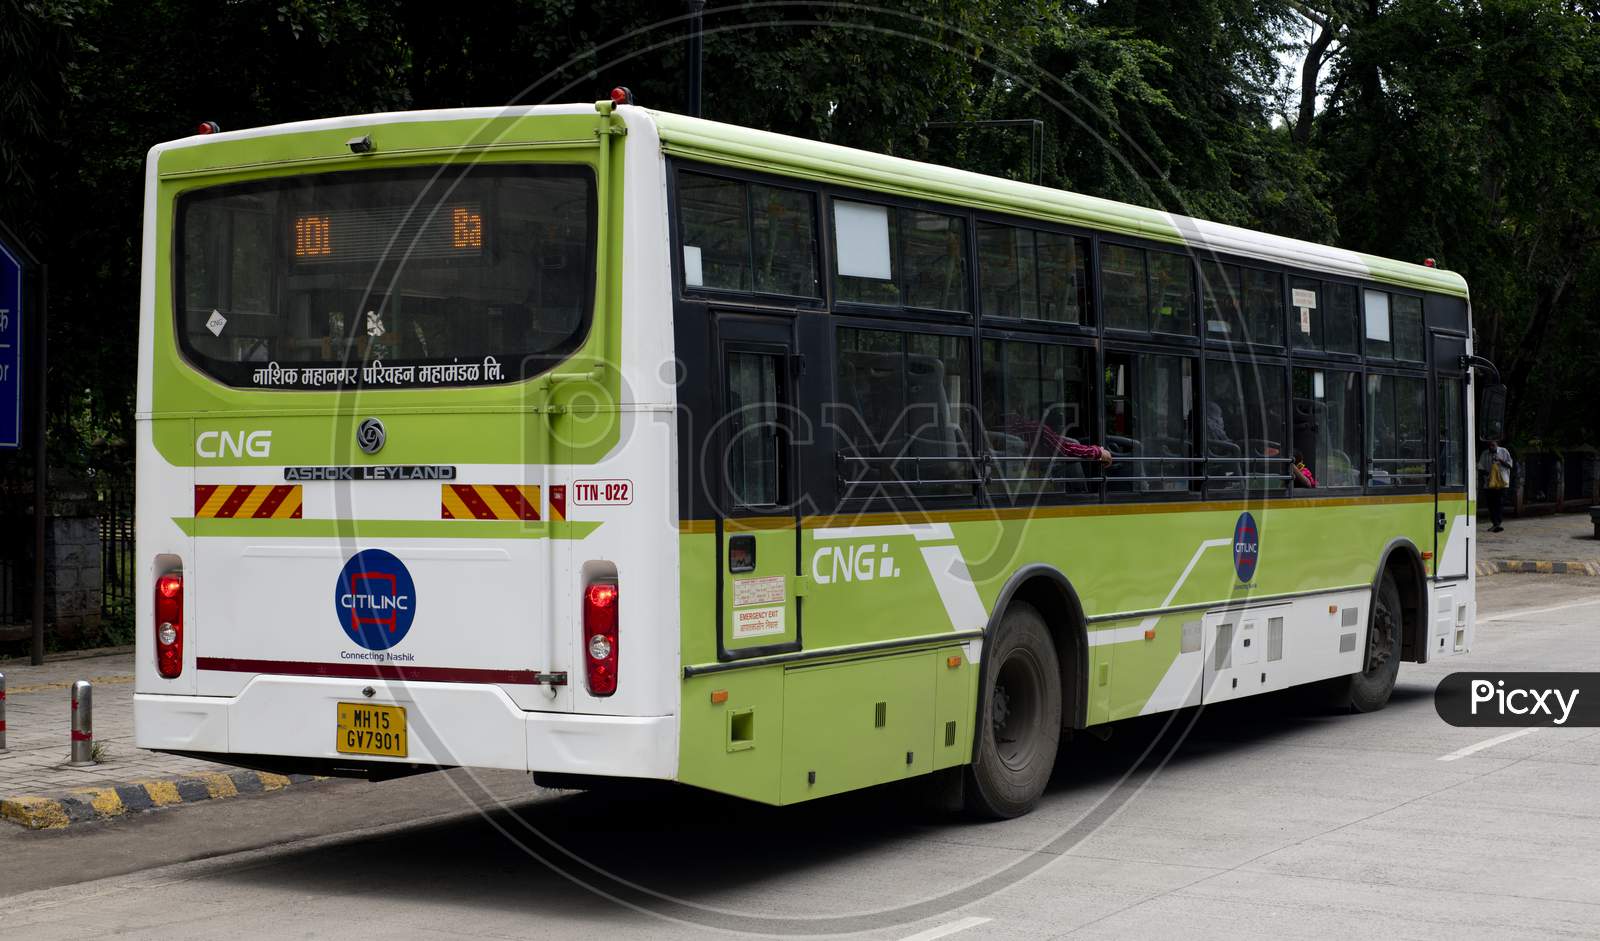 Cng Fueled City Bus Halting At A Bus Stop To Allow Passengers To Alight And Climb Abroad.